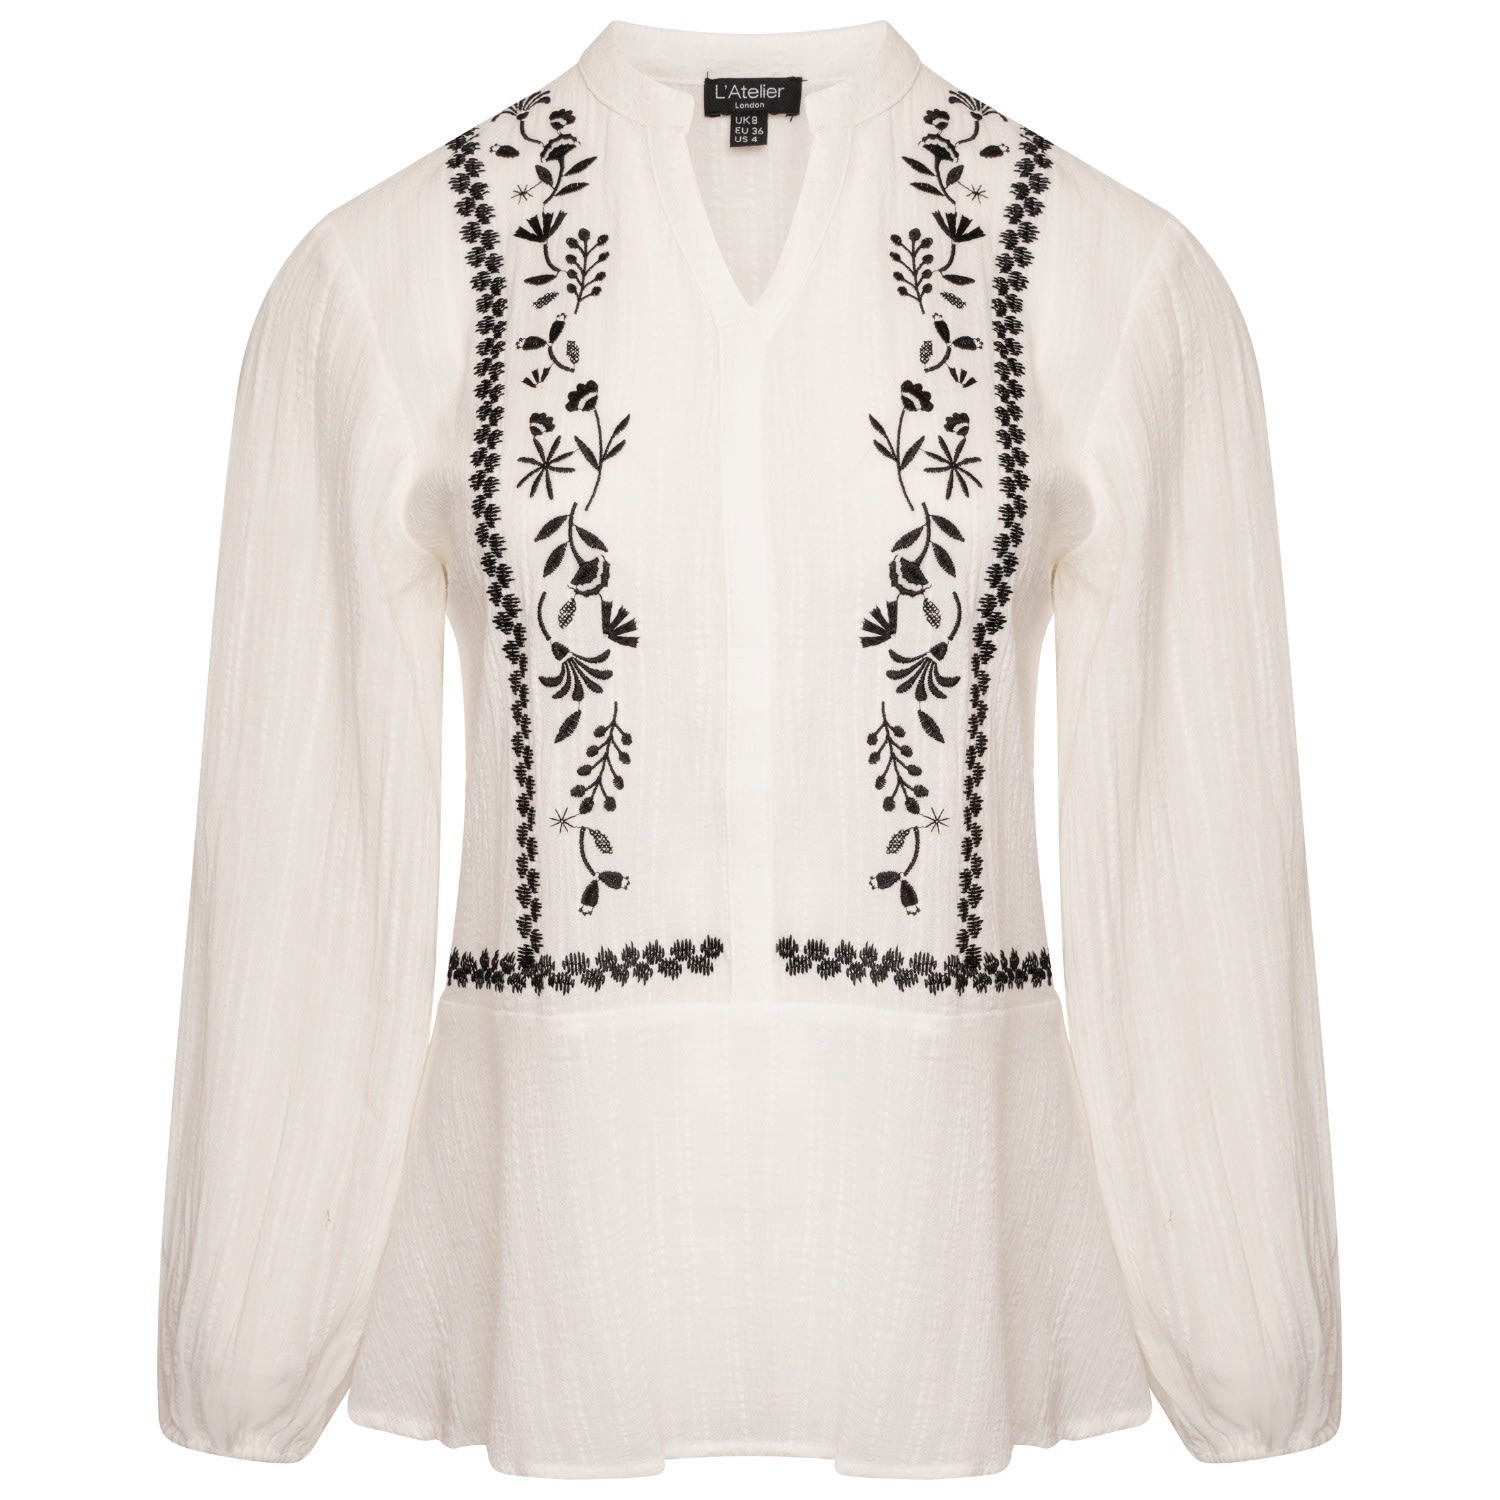 Women’s Jaylani Off-White Embroidered Blouse Extra Small Latelier London